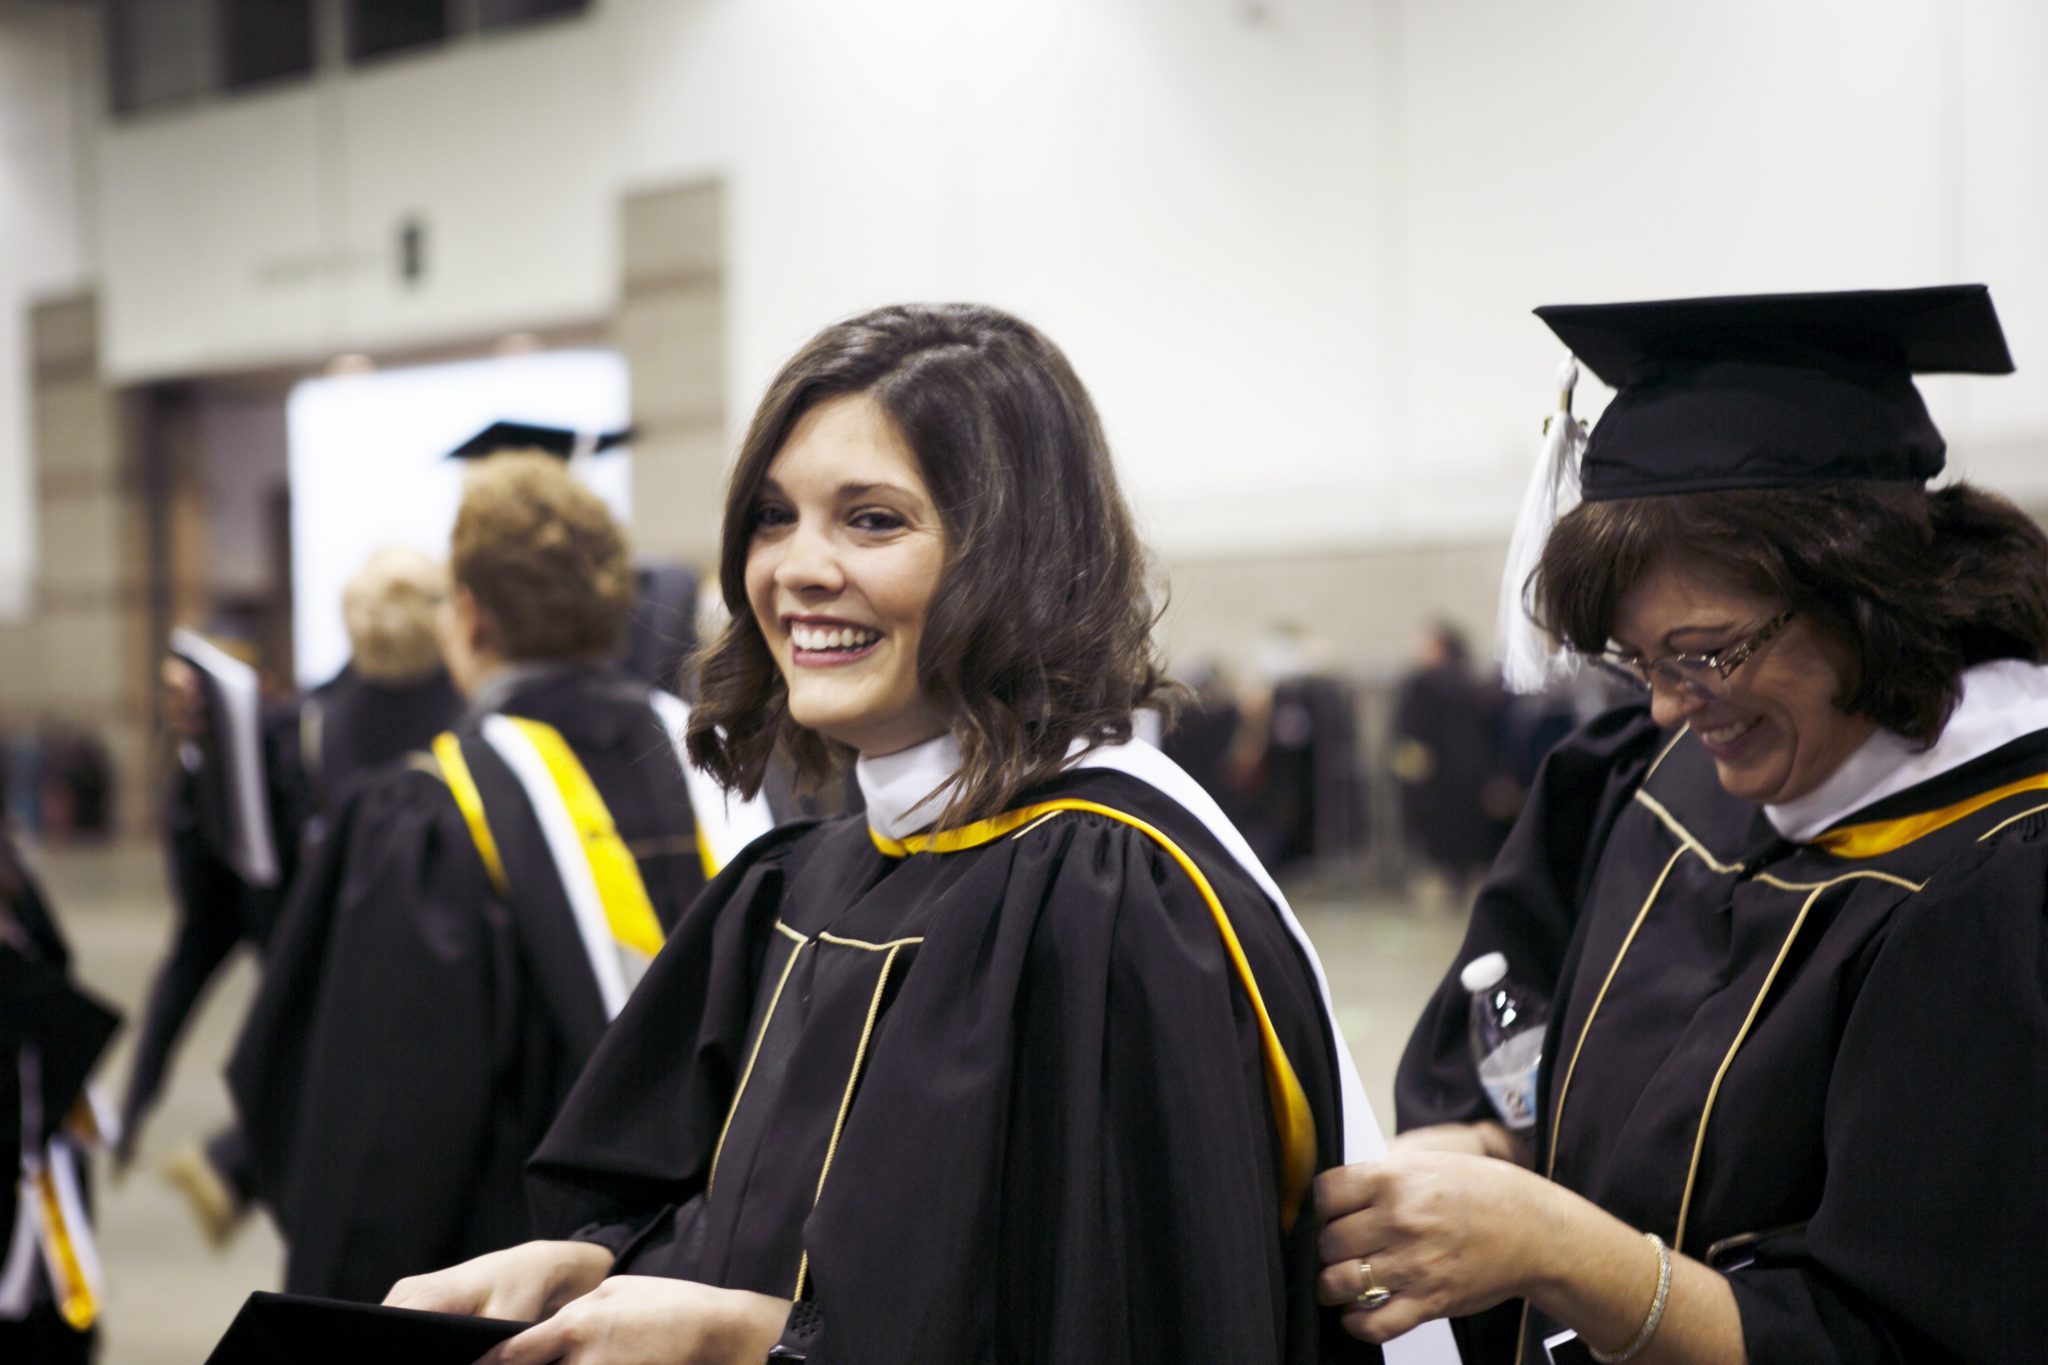 Student helping another with robe during fall commencement 2018